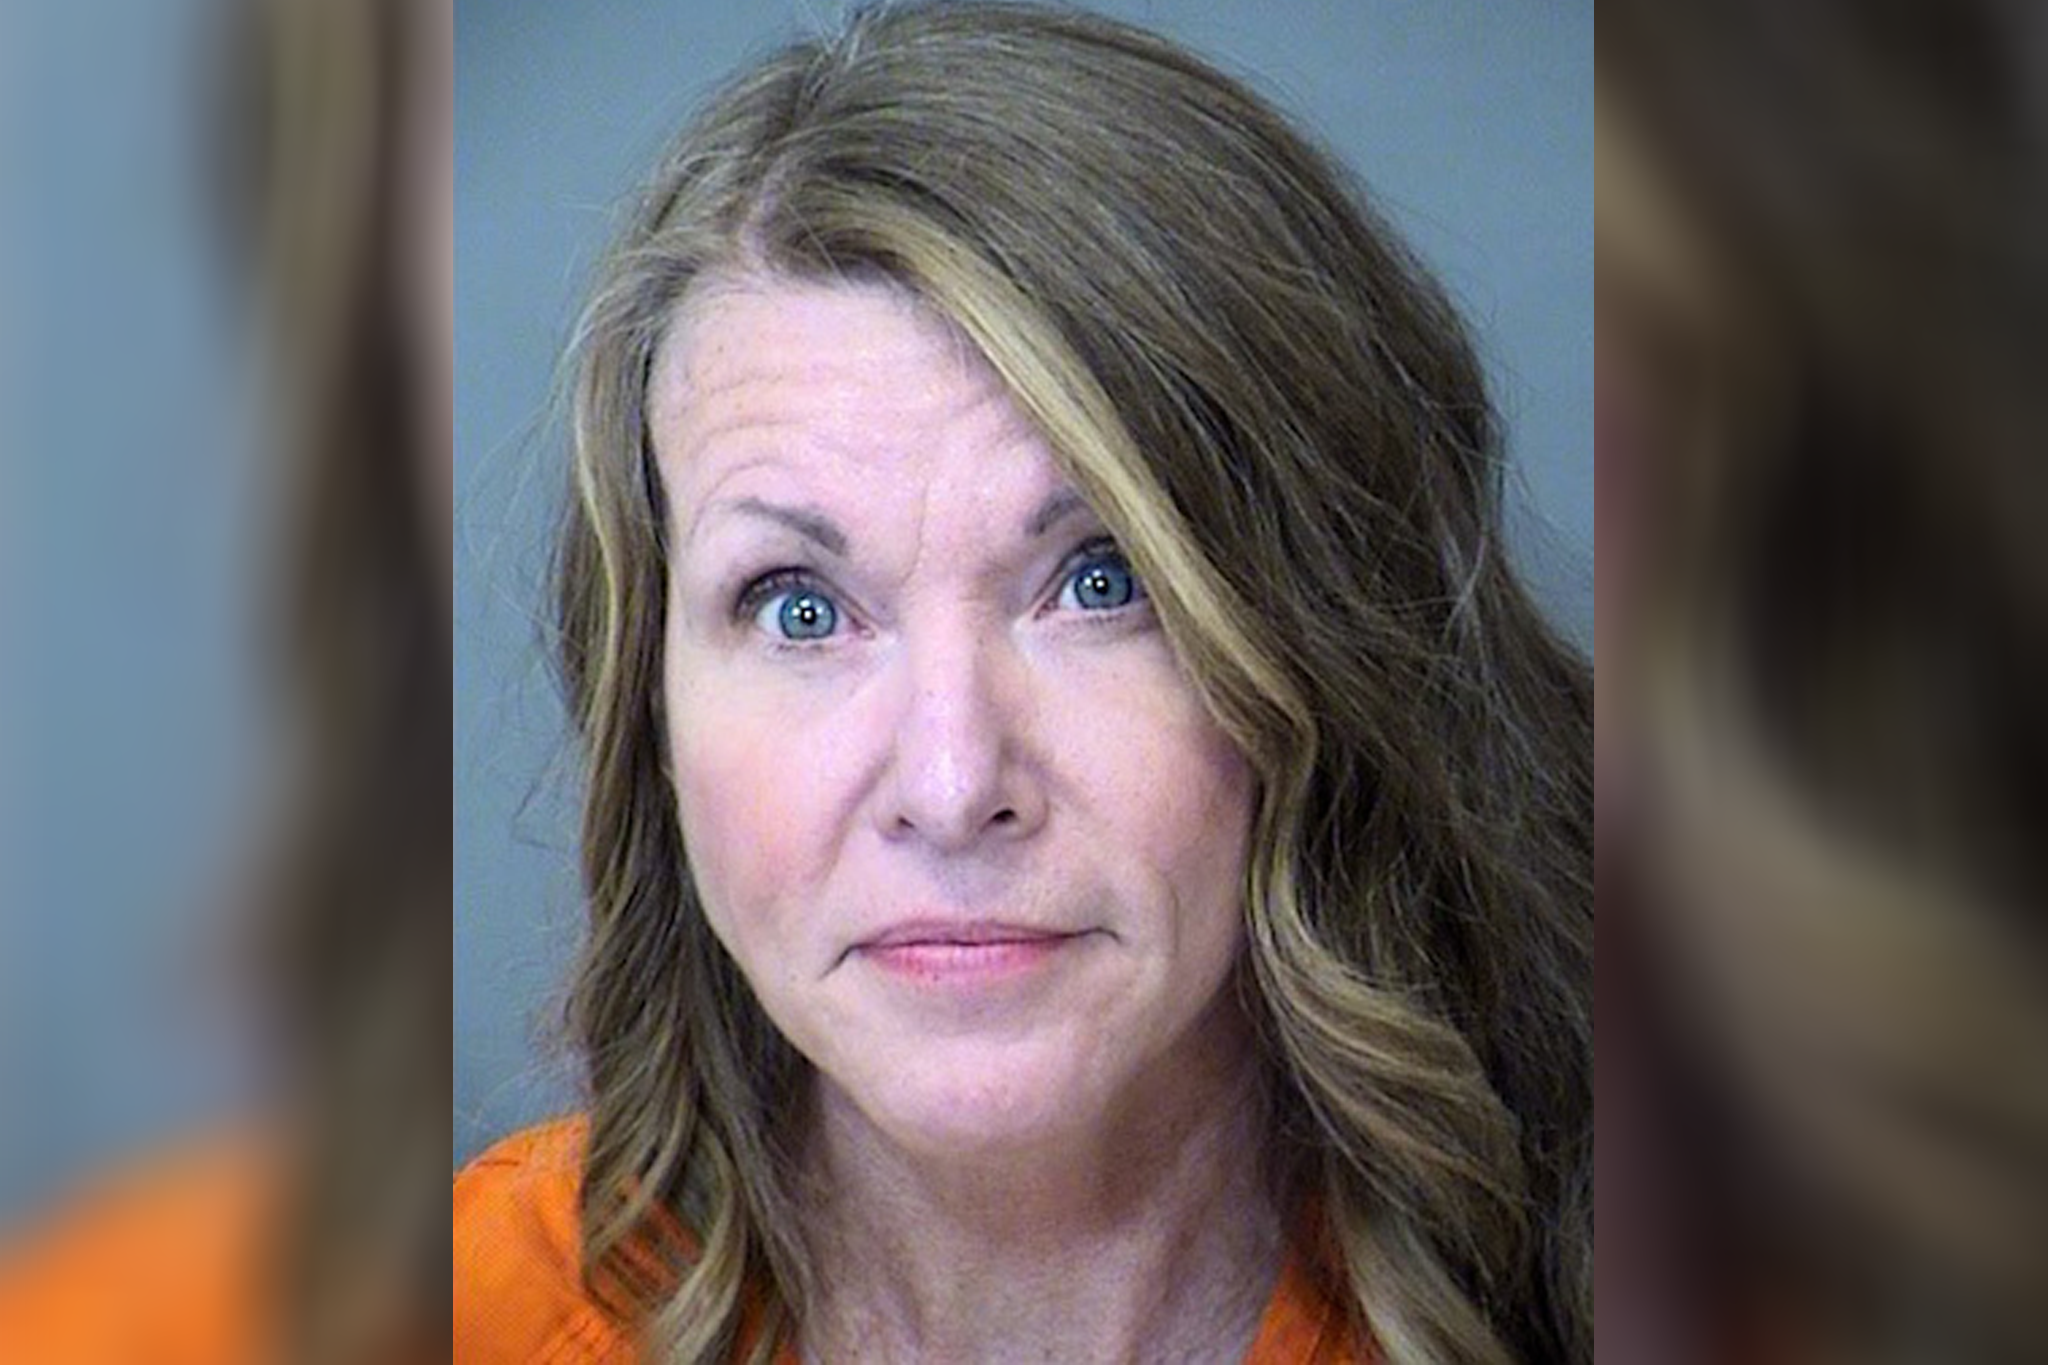 Lori Vallow is seen in her new mug shot following her extradition to Arizona